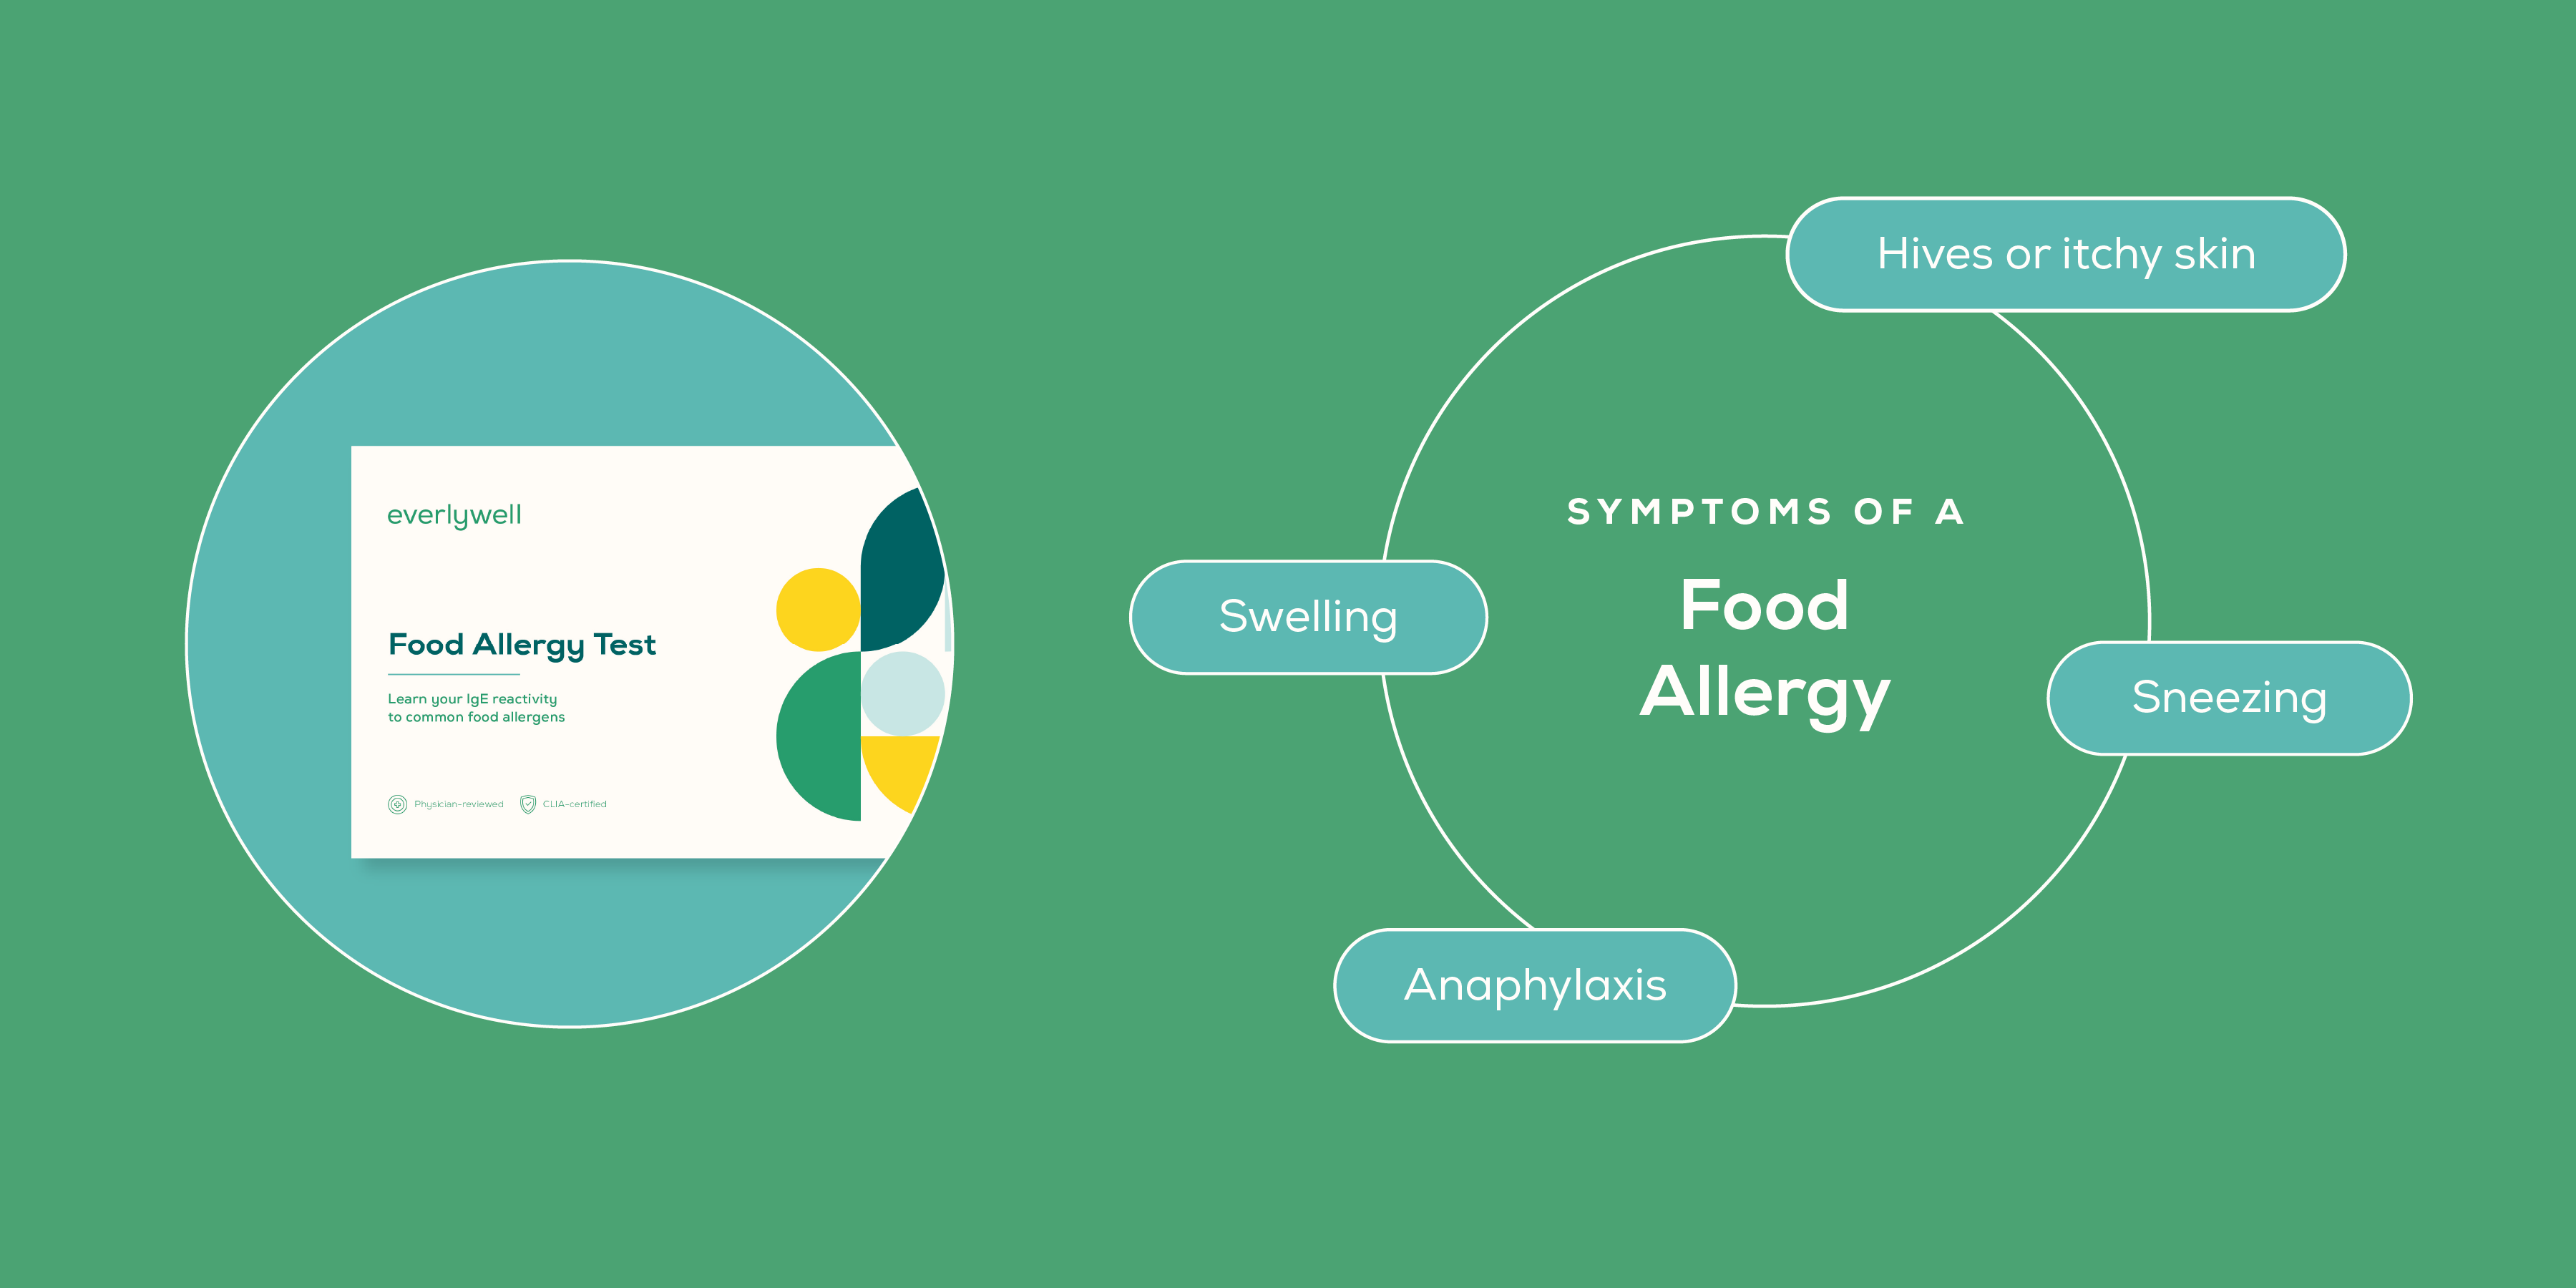 Symptoms of a food allergy: hives or itchy skin, sneezing, swelling, anaphylaxis